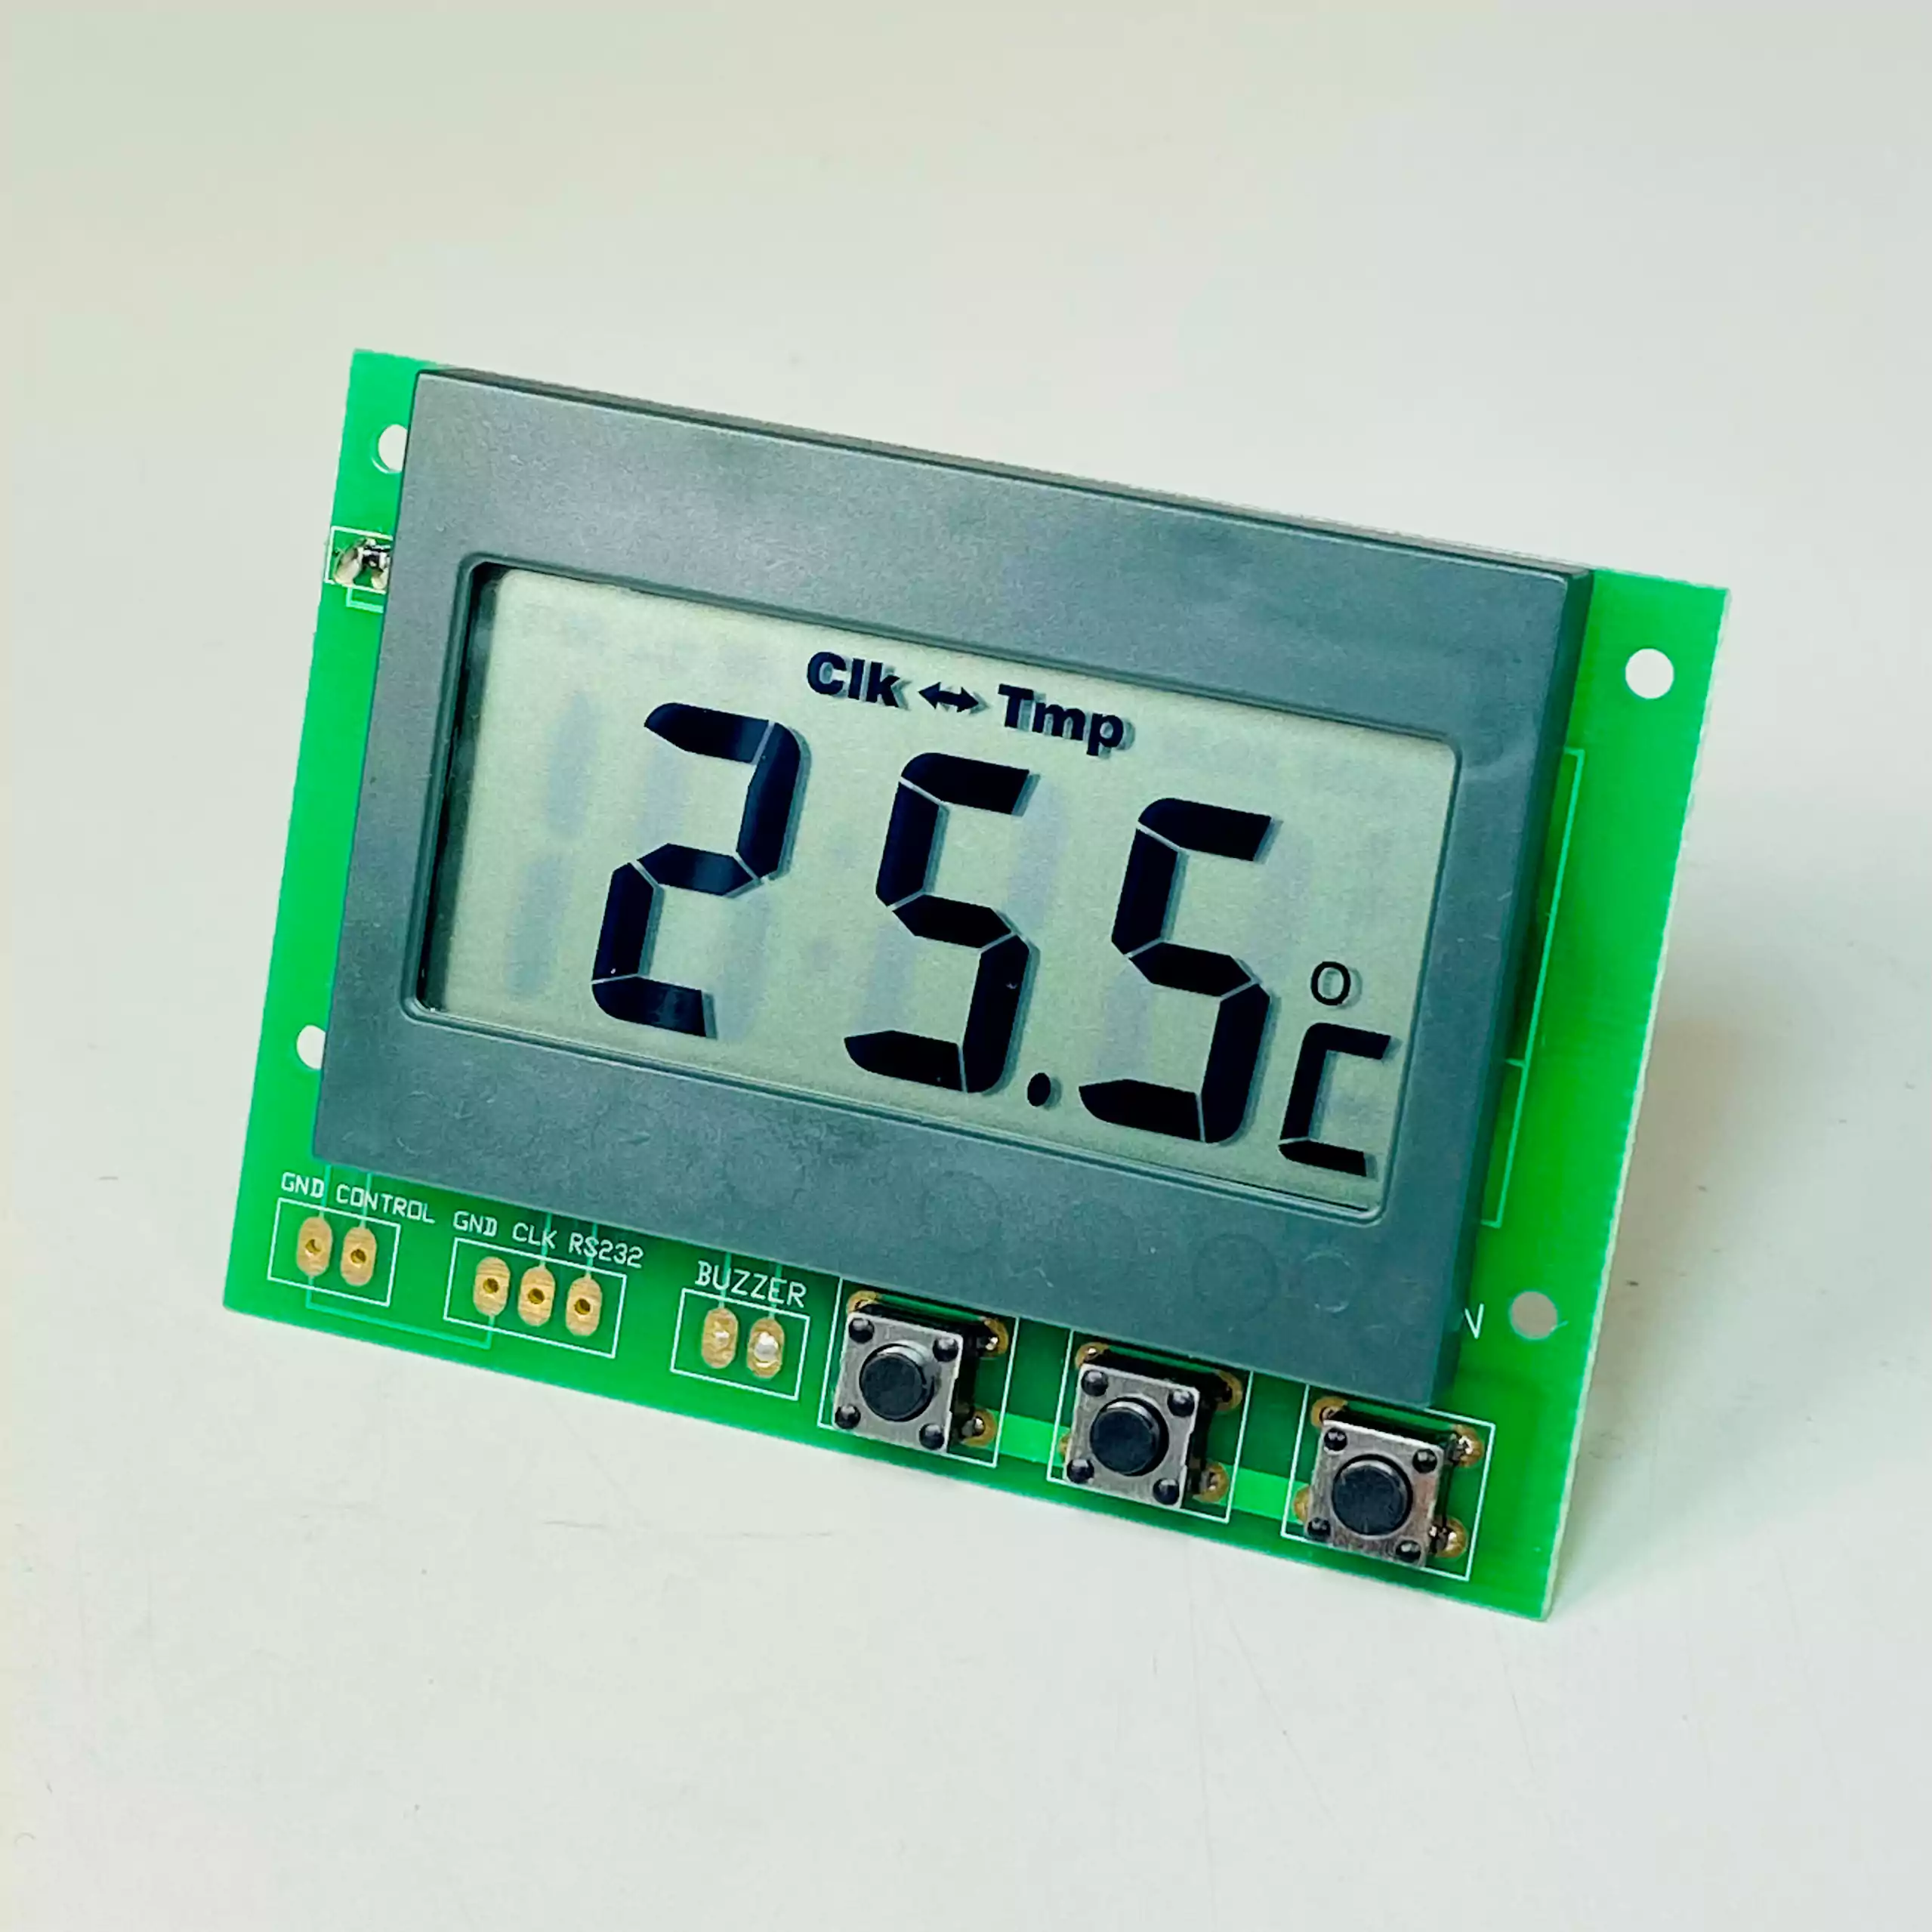 50W-06C Display Mode: clock and temperature alternatively